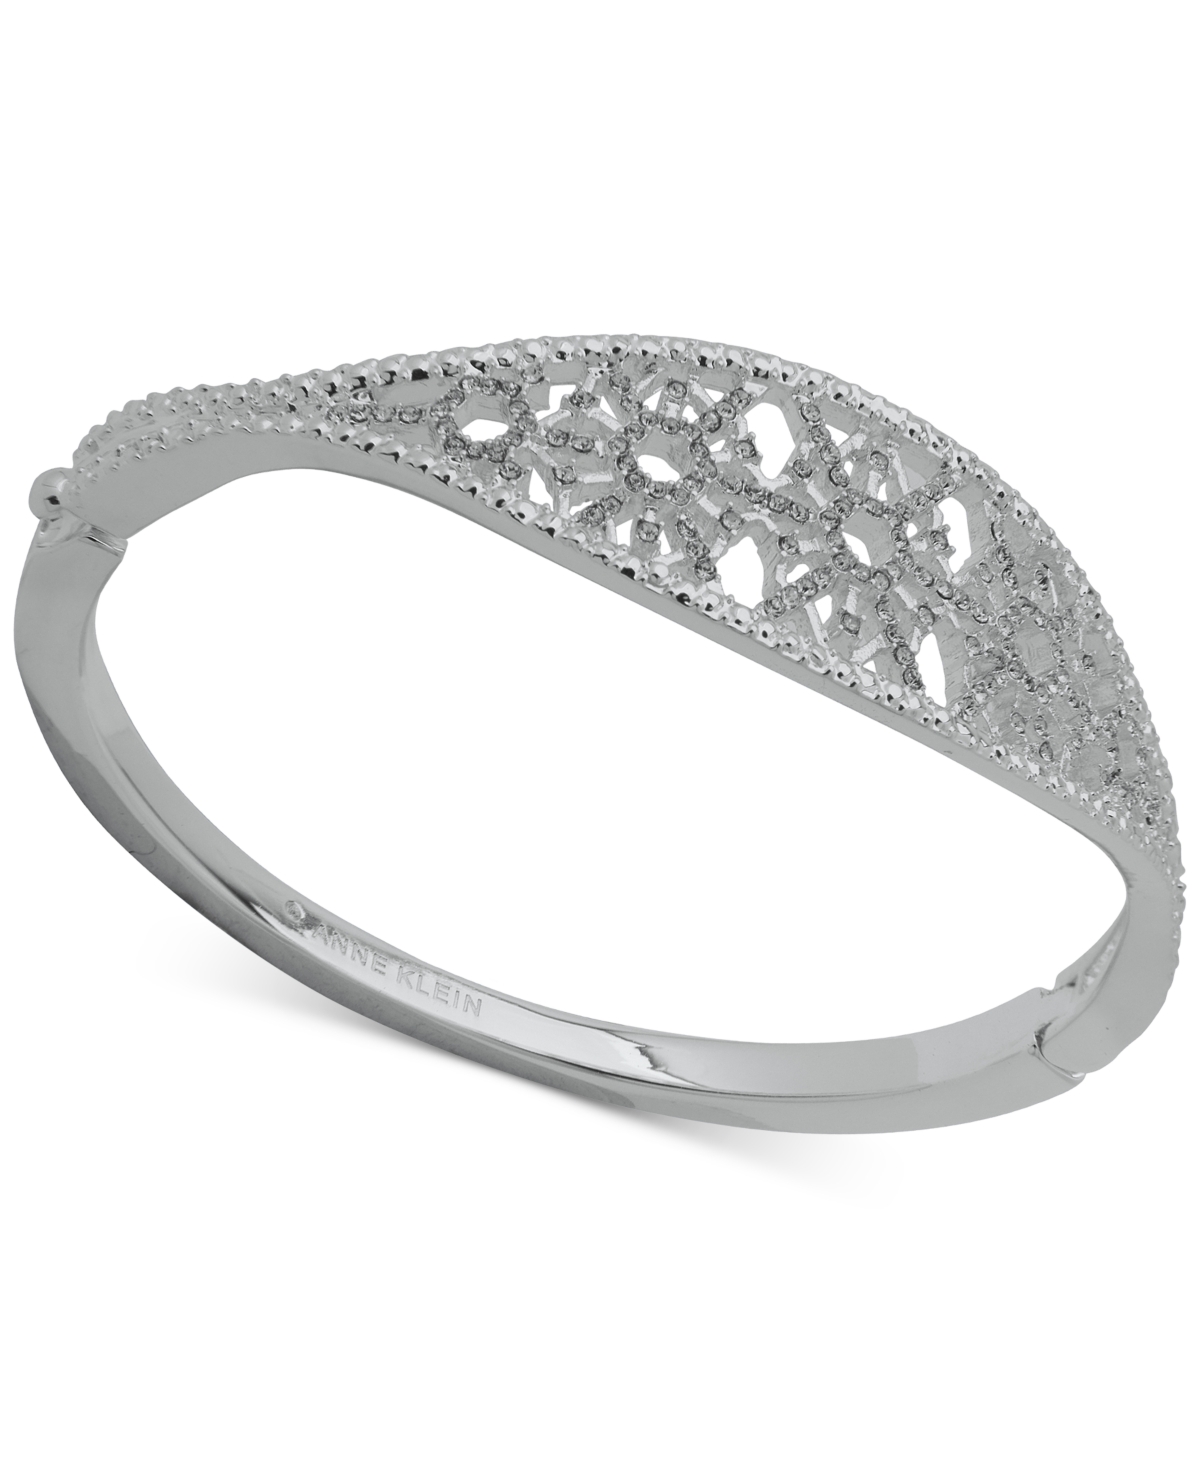 Anne Klein Silver-tone Pave Oval Openwork Bangle Bracelet In Crystal